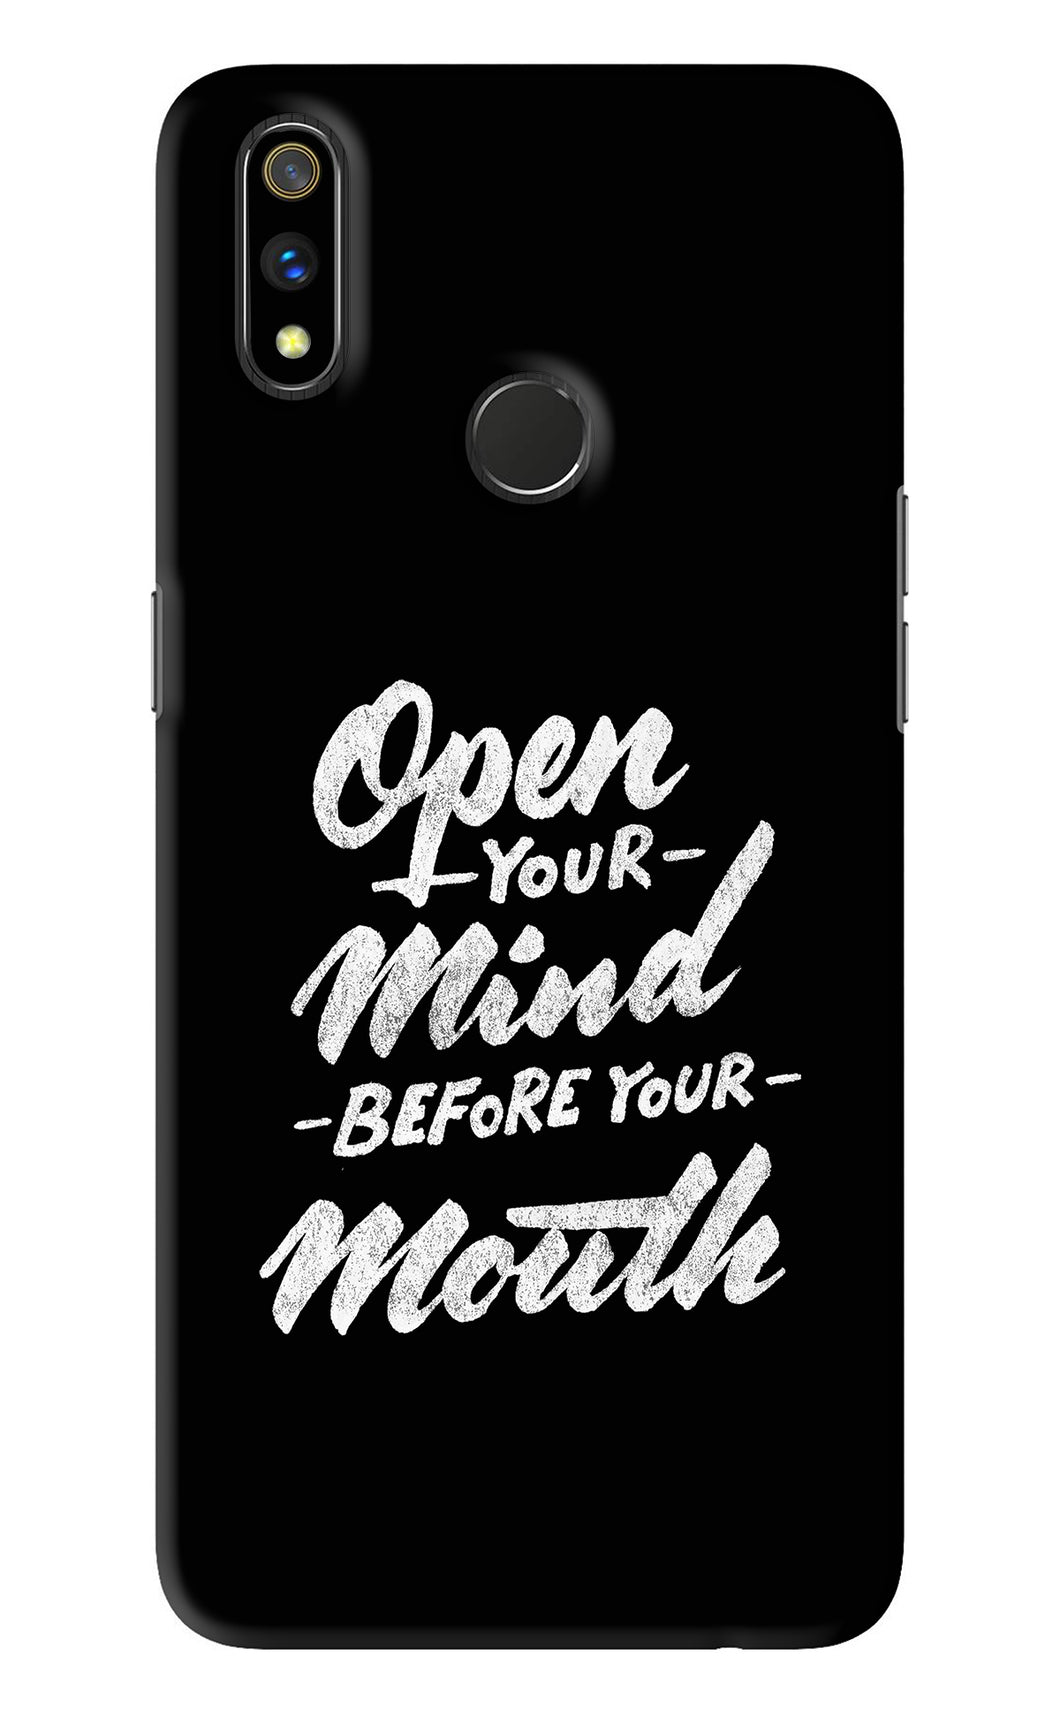 Open Your Mind Before Your Mouth Realme 3 Pro Back Skin Wrap